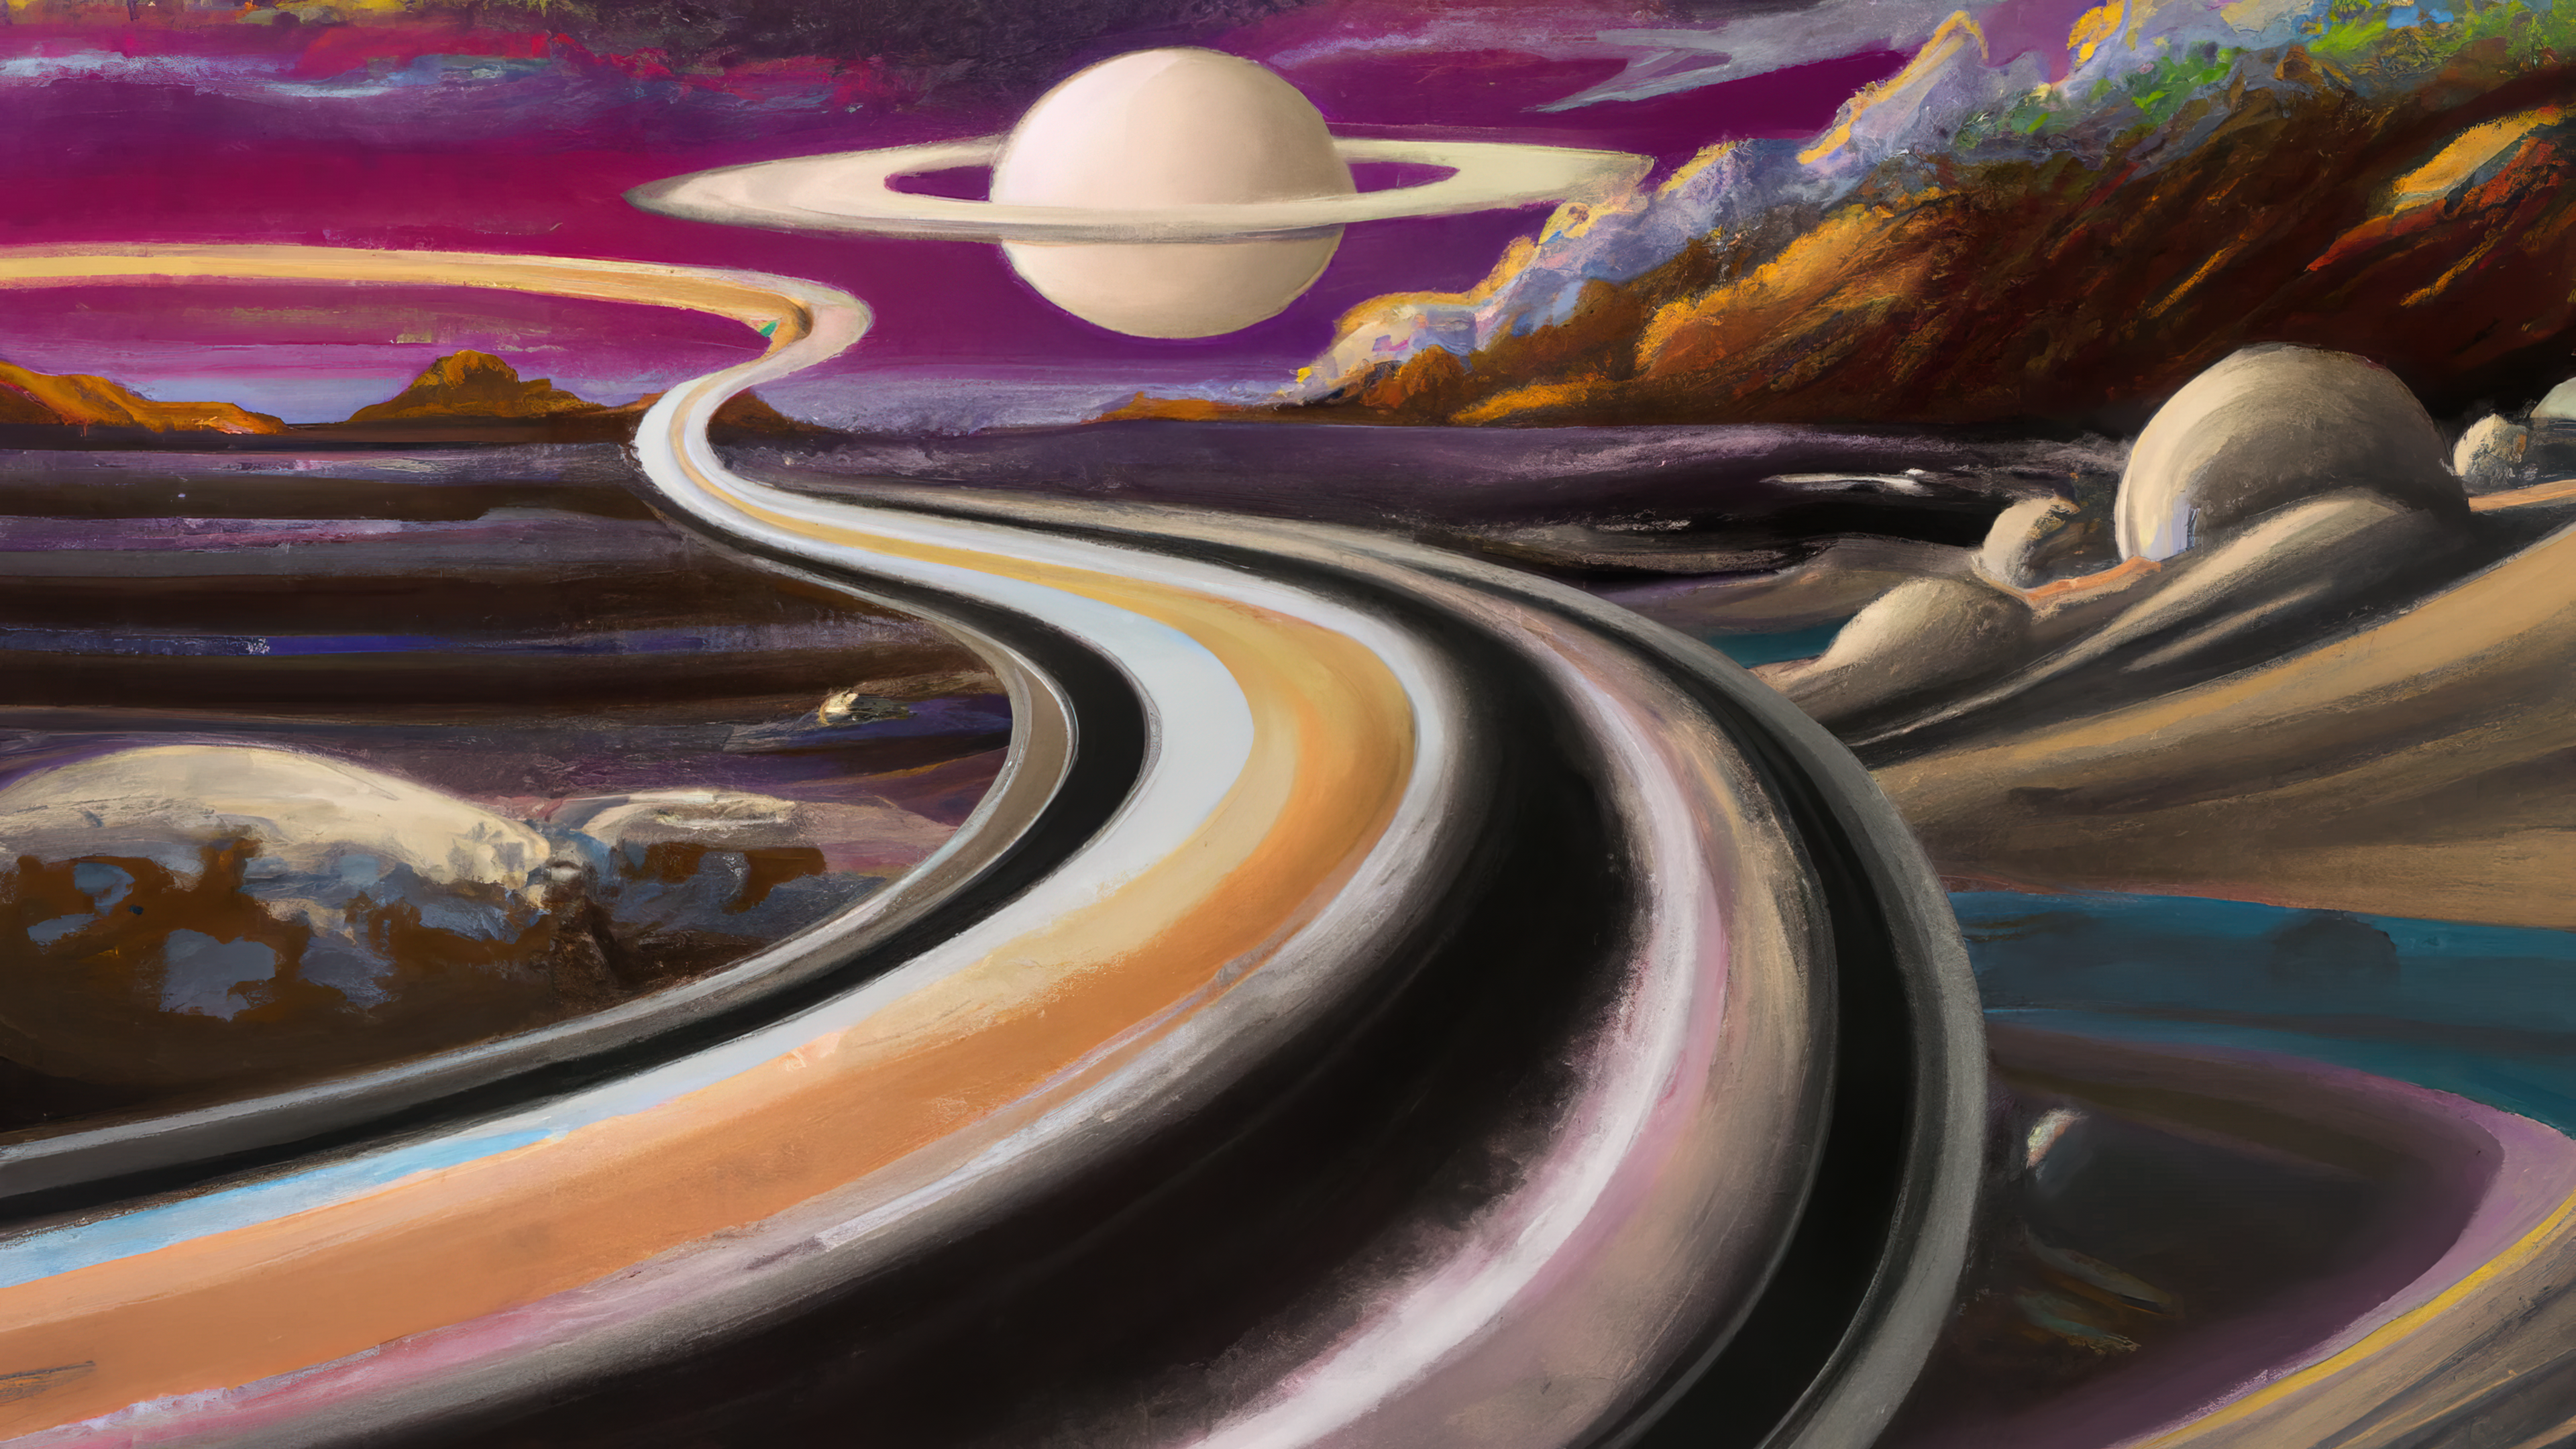 General 3840x2160 AI art painting landscape surreal space Saturn Rings Of Saturn alien world planet space art